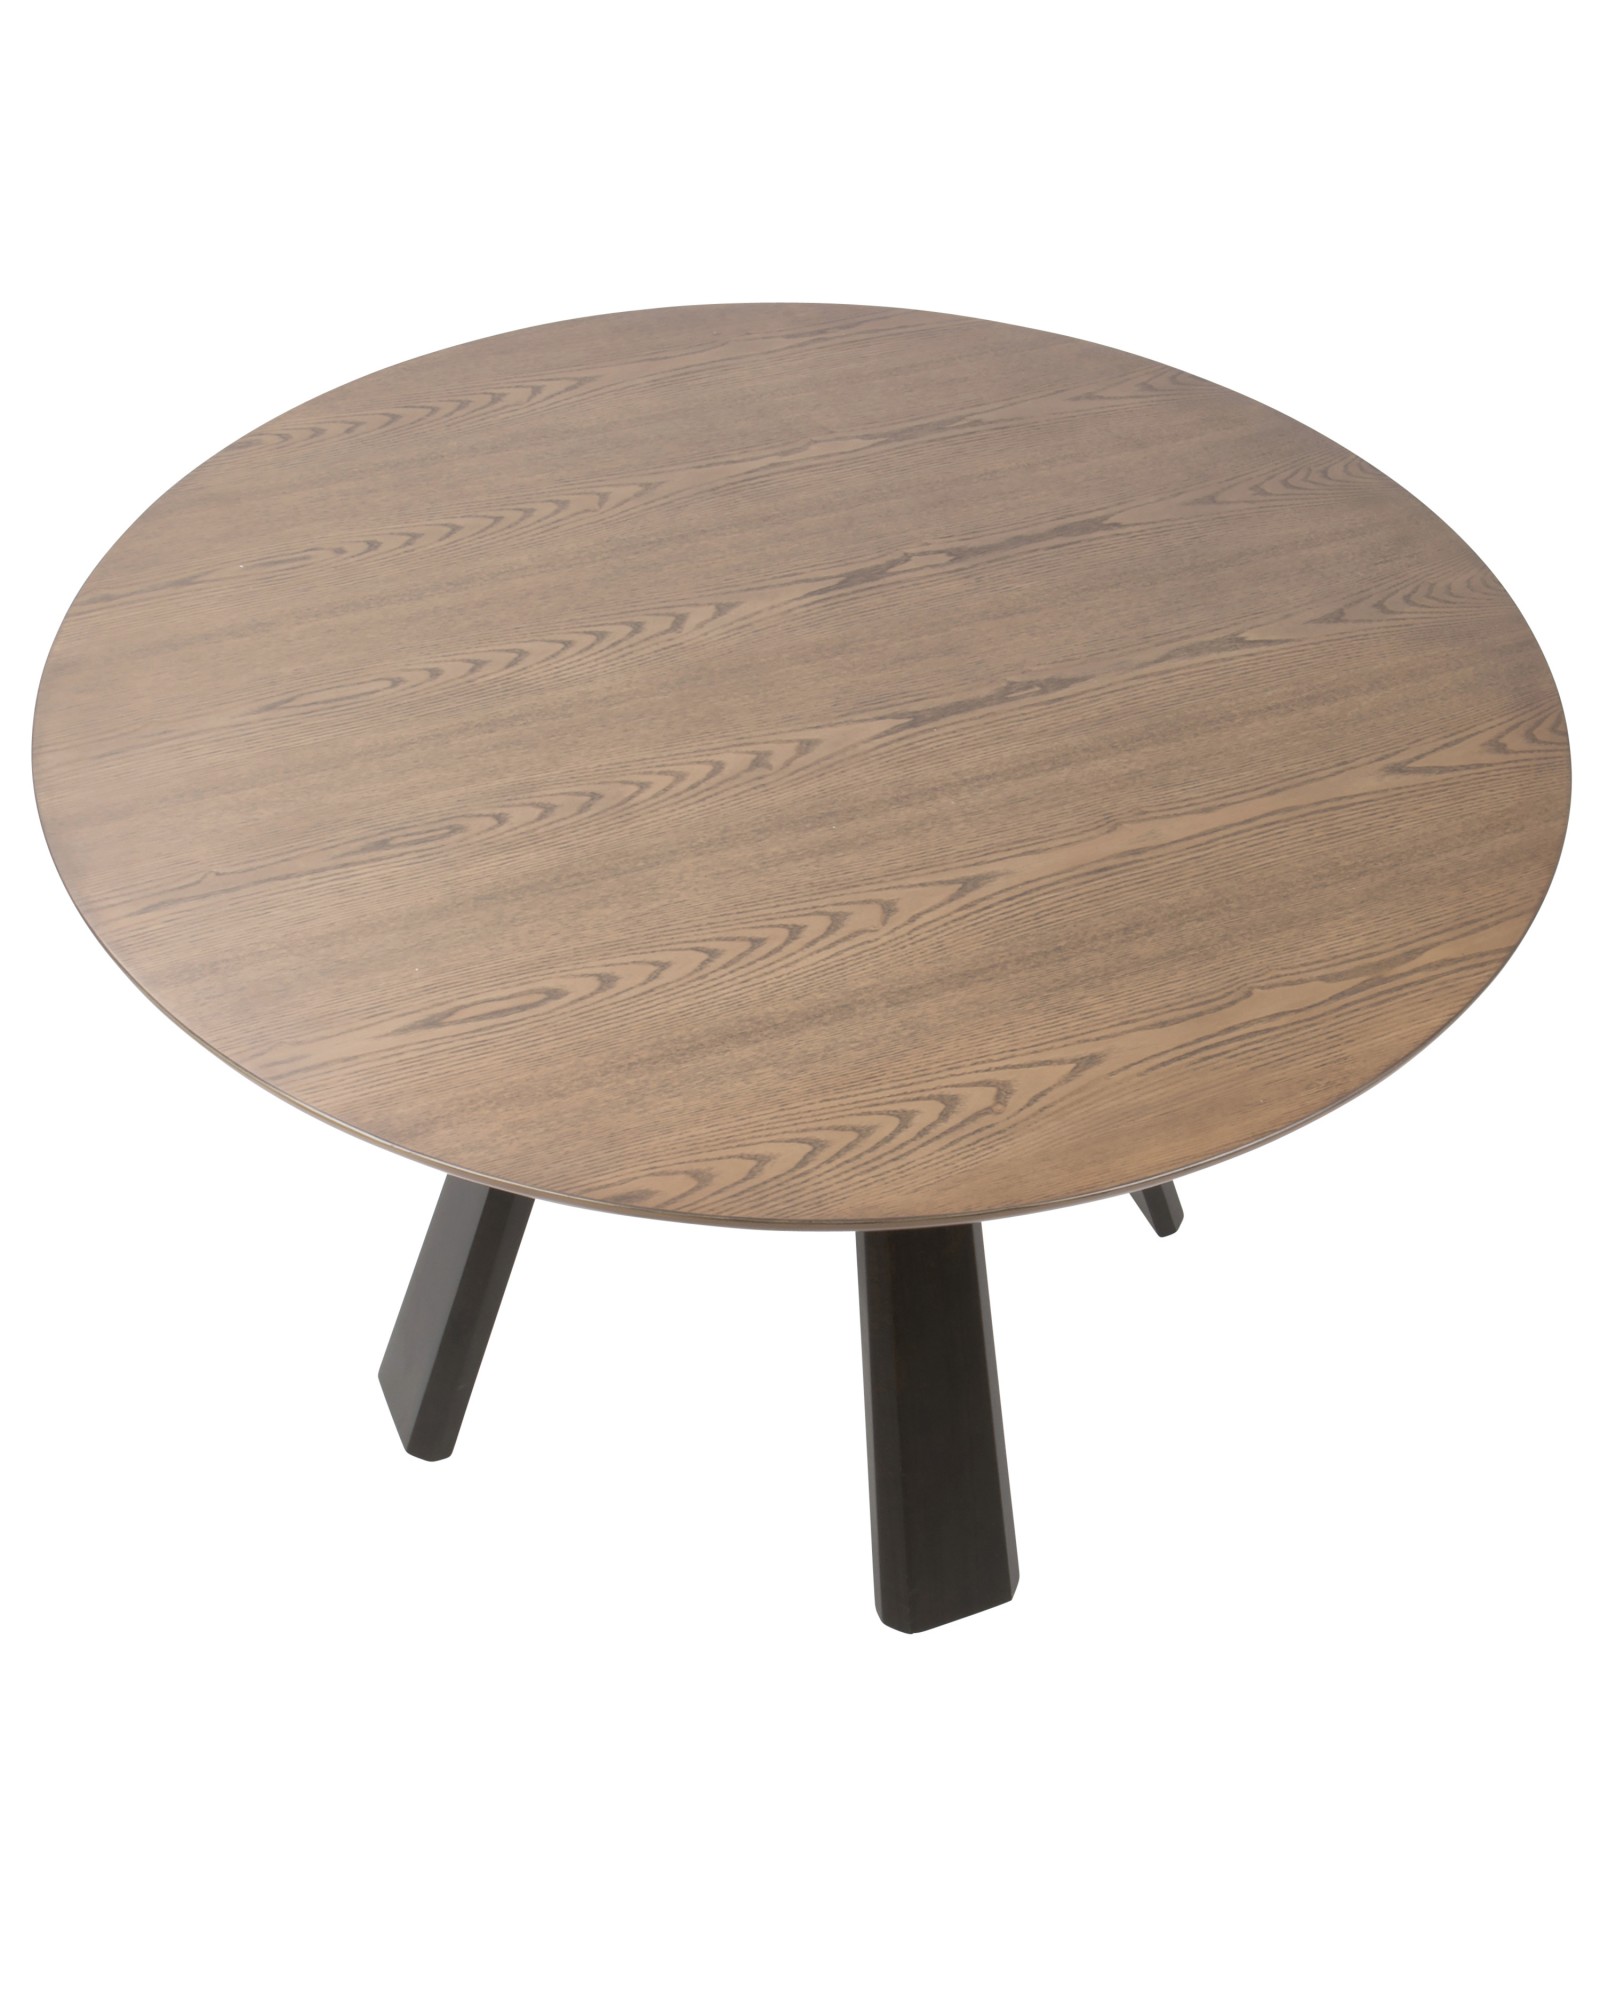 Elton Contemporary Dining Table in Walnut Wood and Espresso